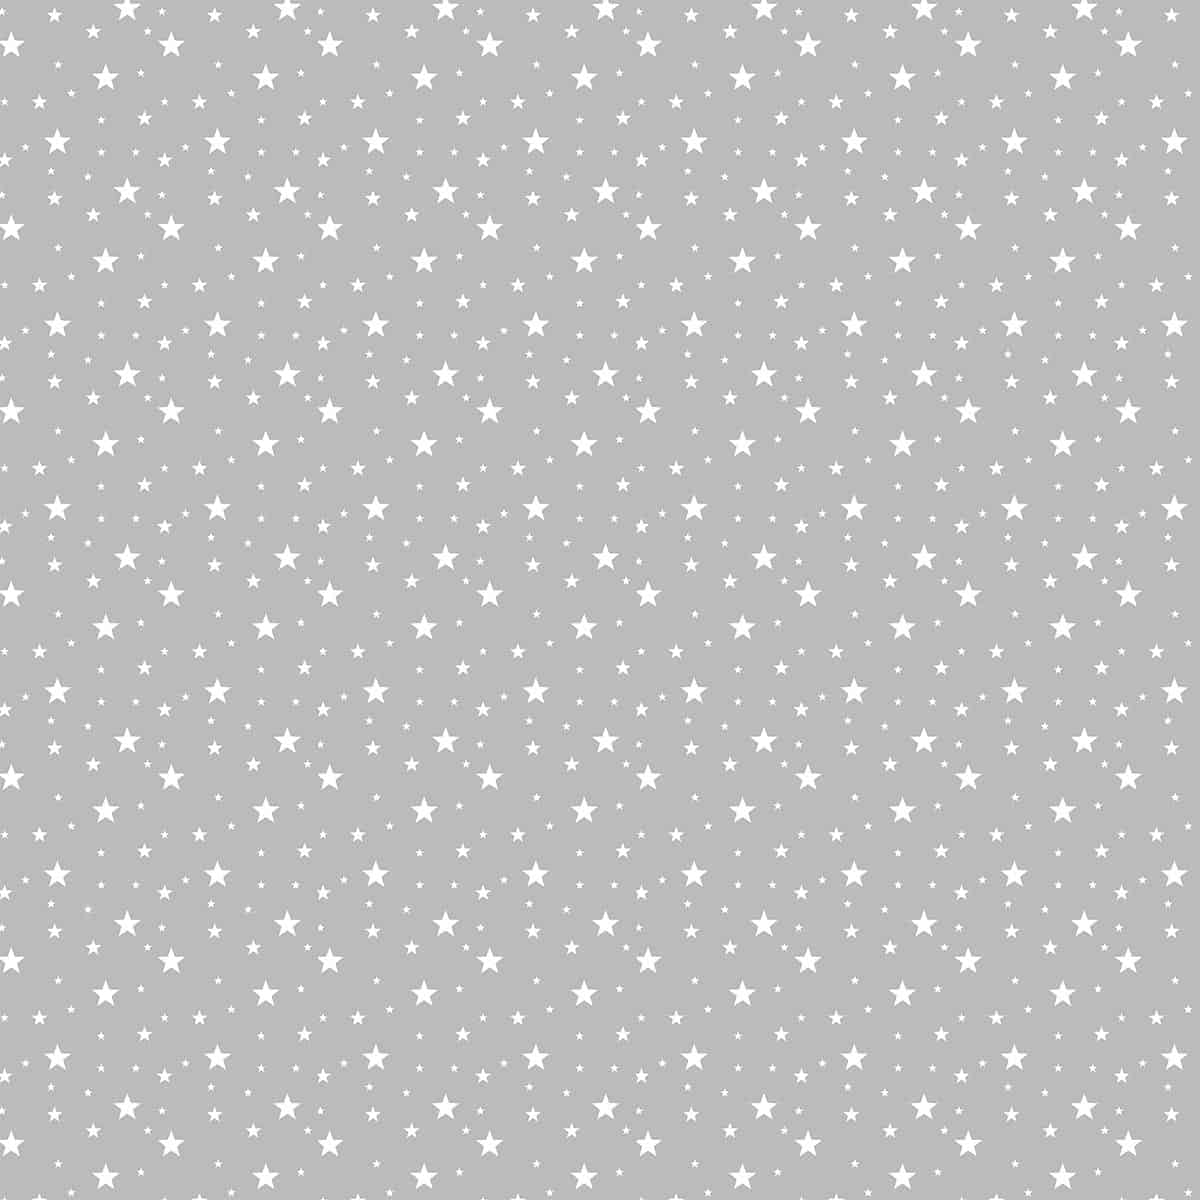 Dreams Under the Stars: Seamless Repeat Pattern for Kids Room, Grey